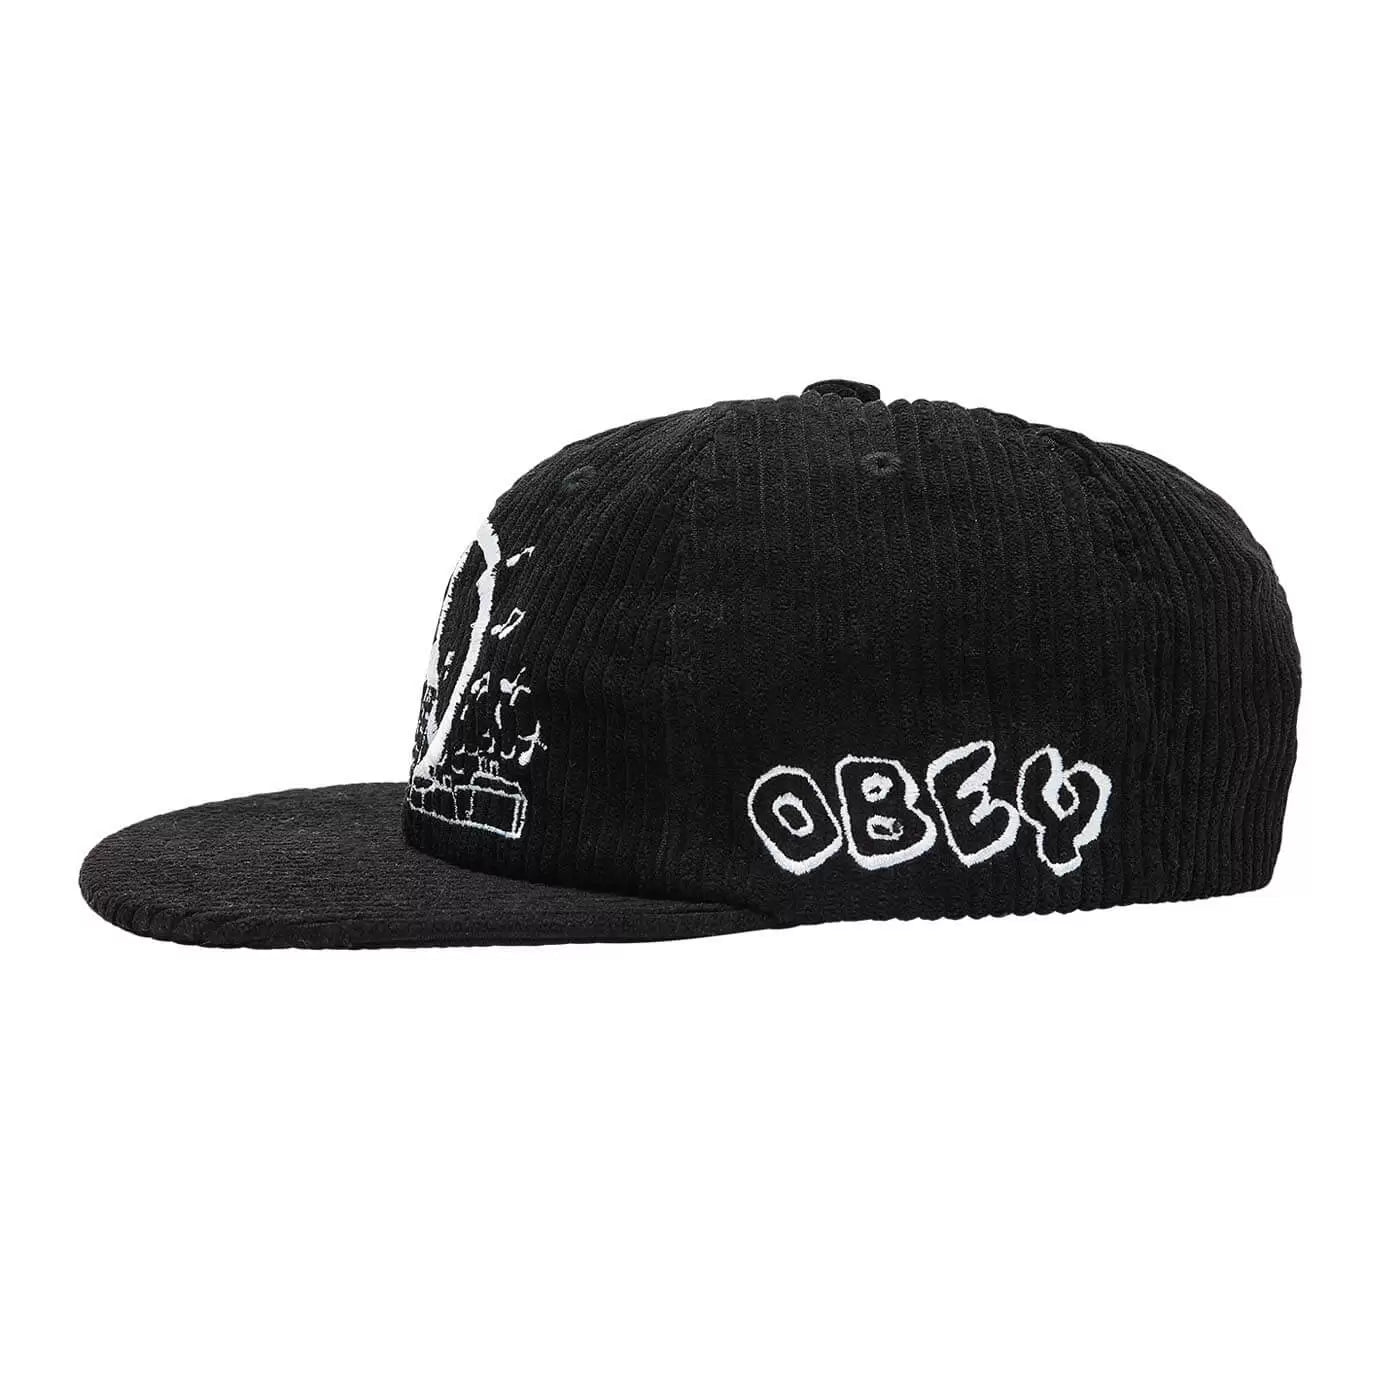 Obey Uptown Cord 6 Panel Cap - Black